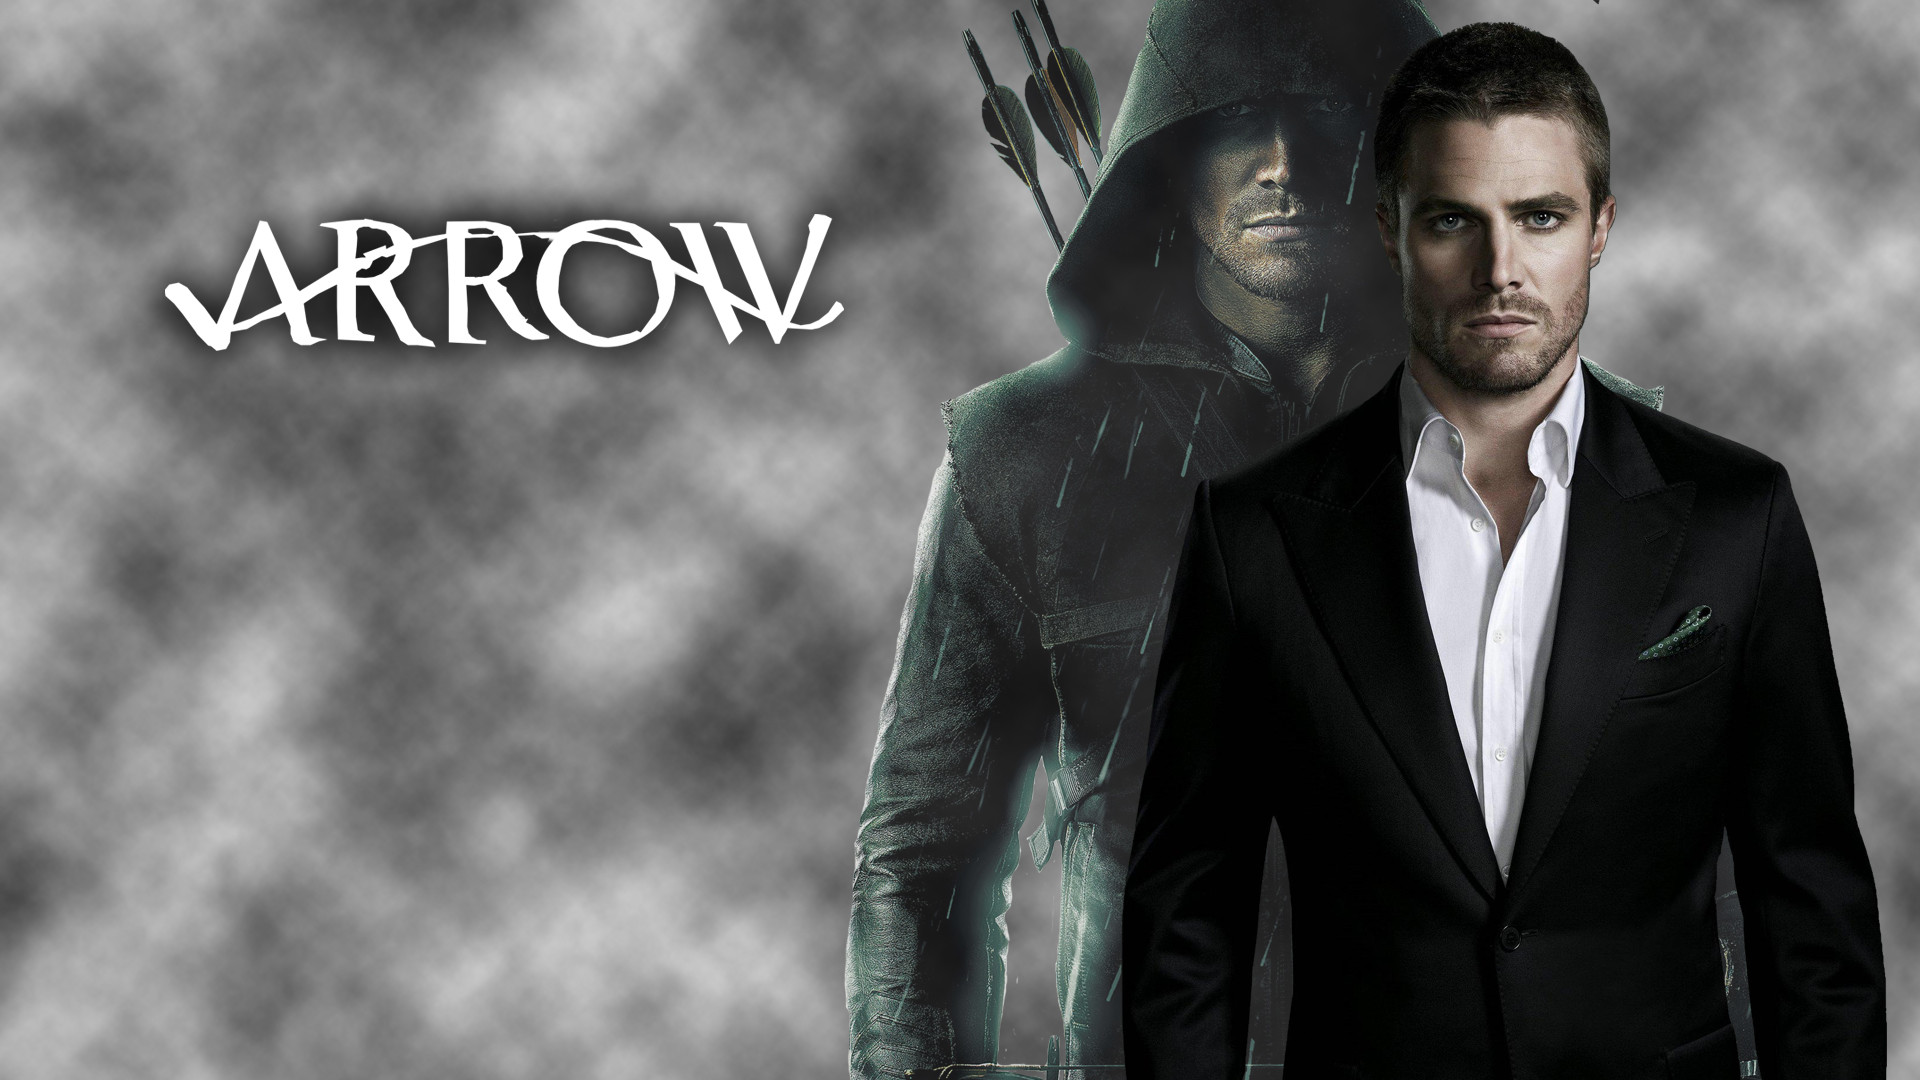 1920x1080 DeviantArt: More Like Oliver Queen/Arrow Wallpaper  by .